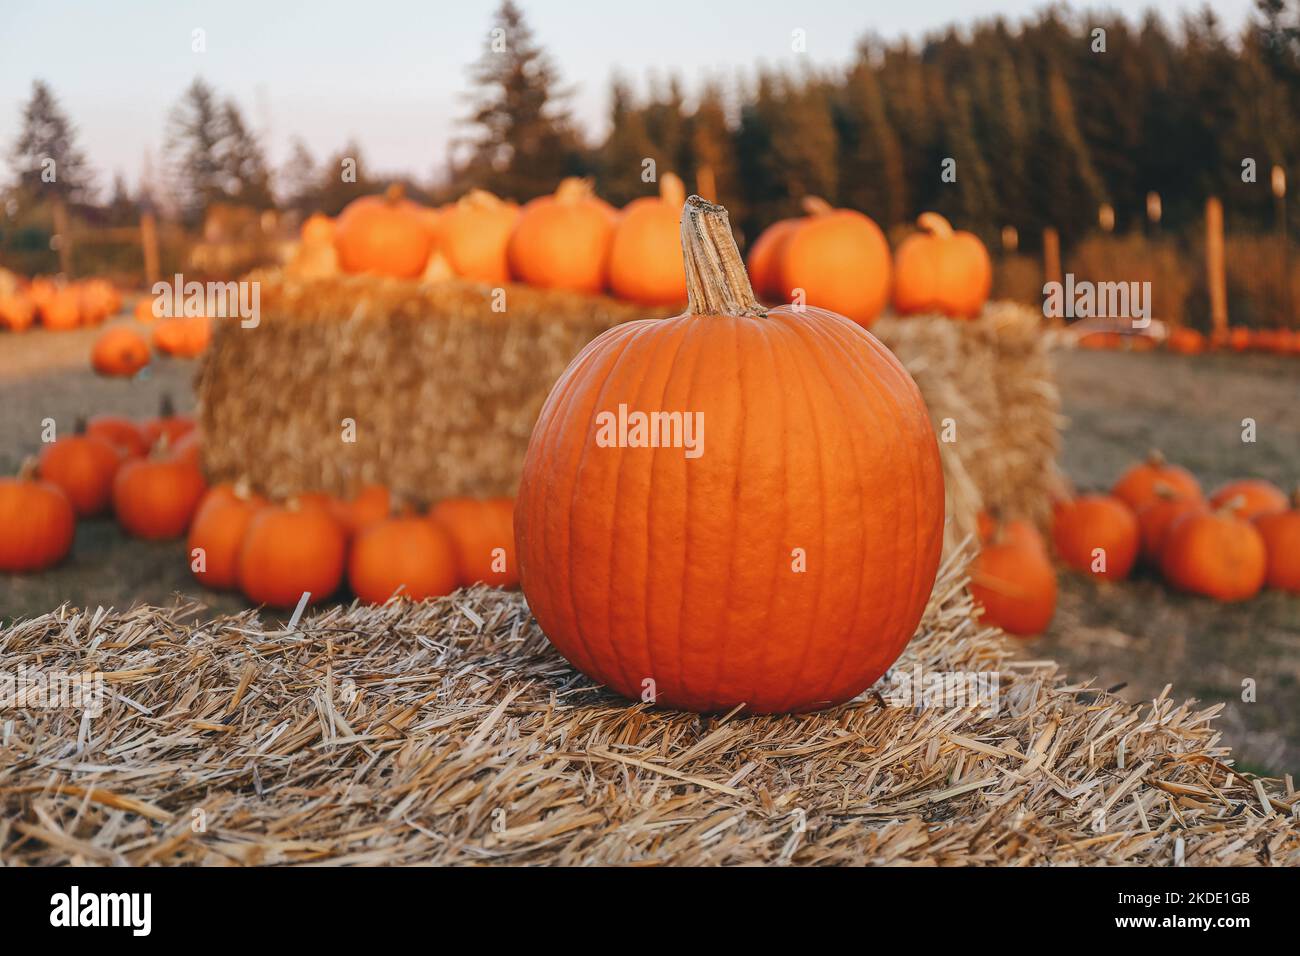 Orange pumpkins on hay bales at a fall festival during sunset Stock Photo